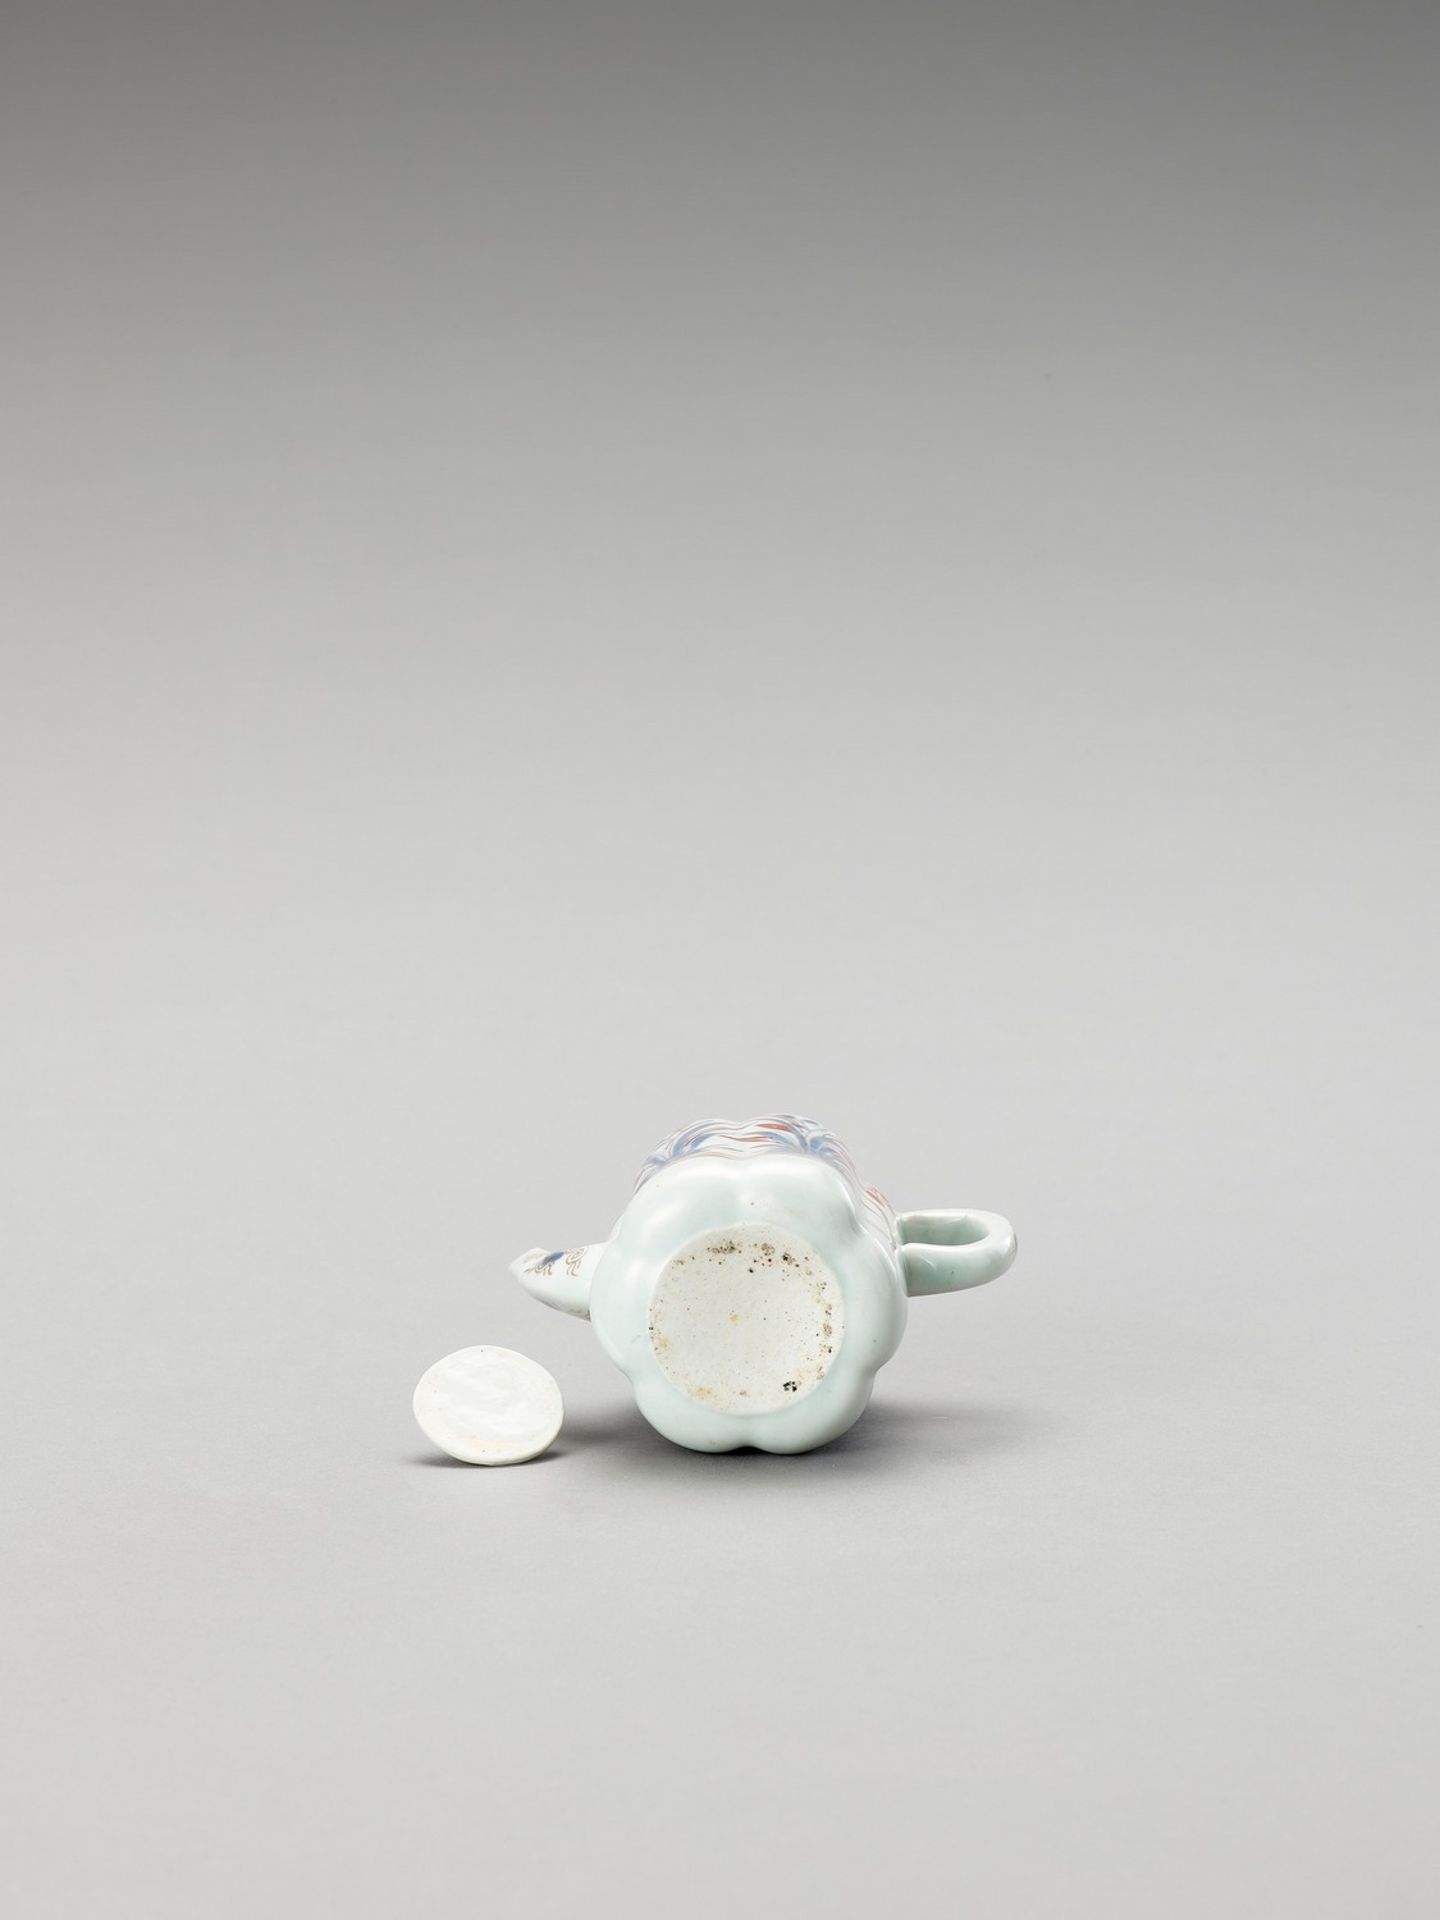 AN IMARI PORCELAIN TEAPOT WITH COVER - Image 6 of 6